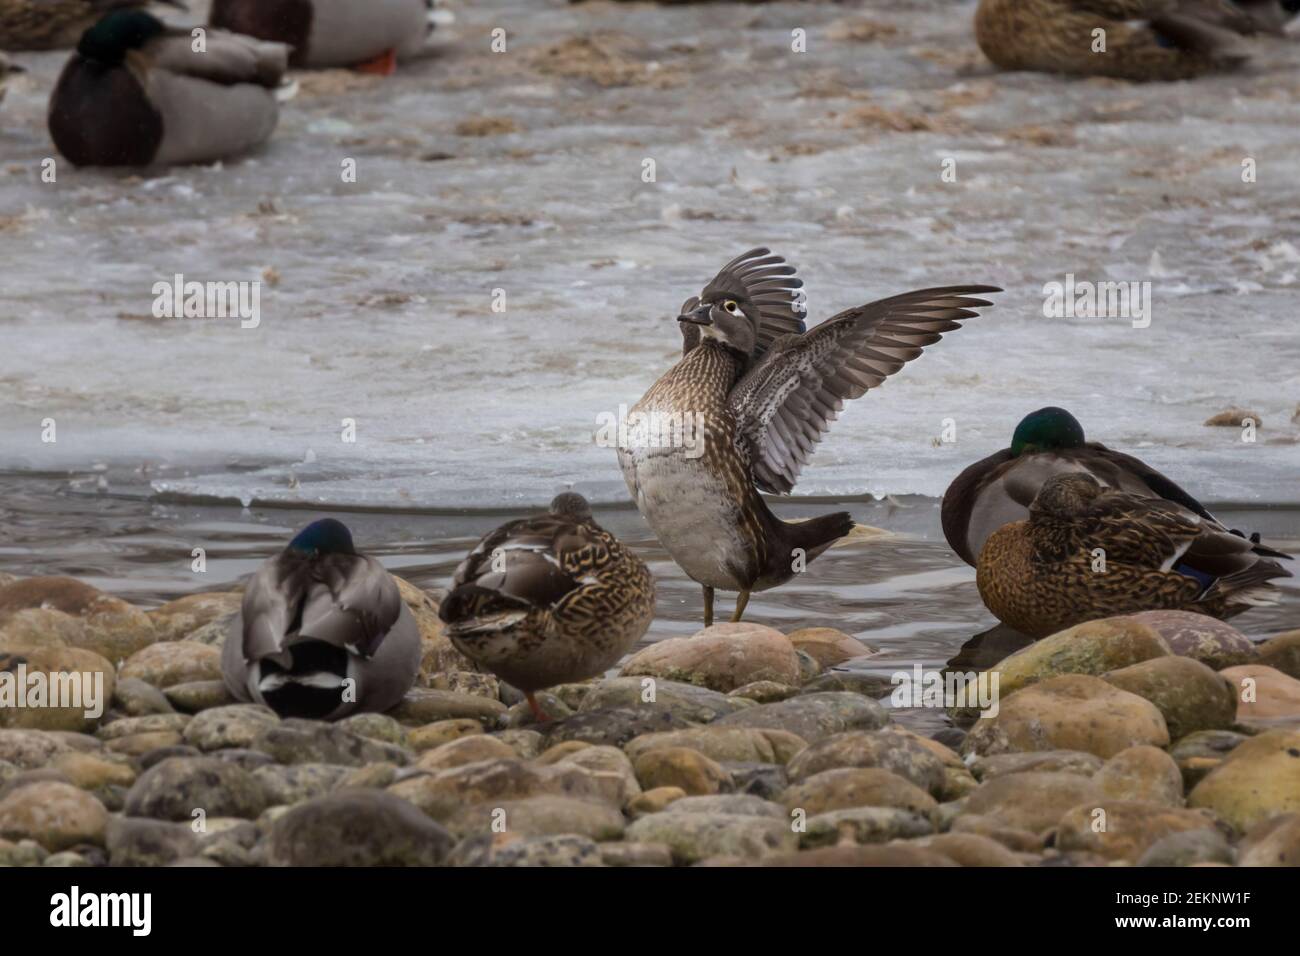 Wood Duck Female (Aix sponsa) stretching its wings during winter on a river with ice, snow, rocks and sleeping mallards (Anas platyrhynchos) in Canada Stock Photo